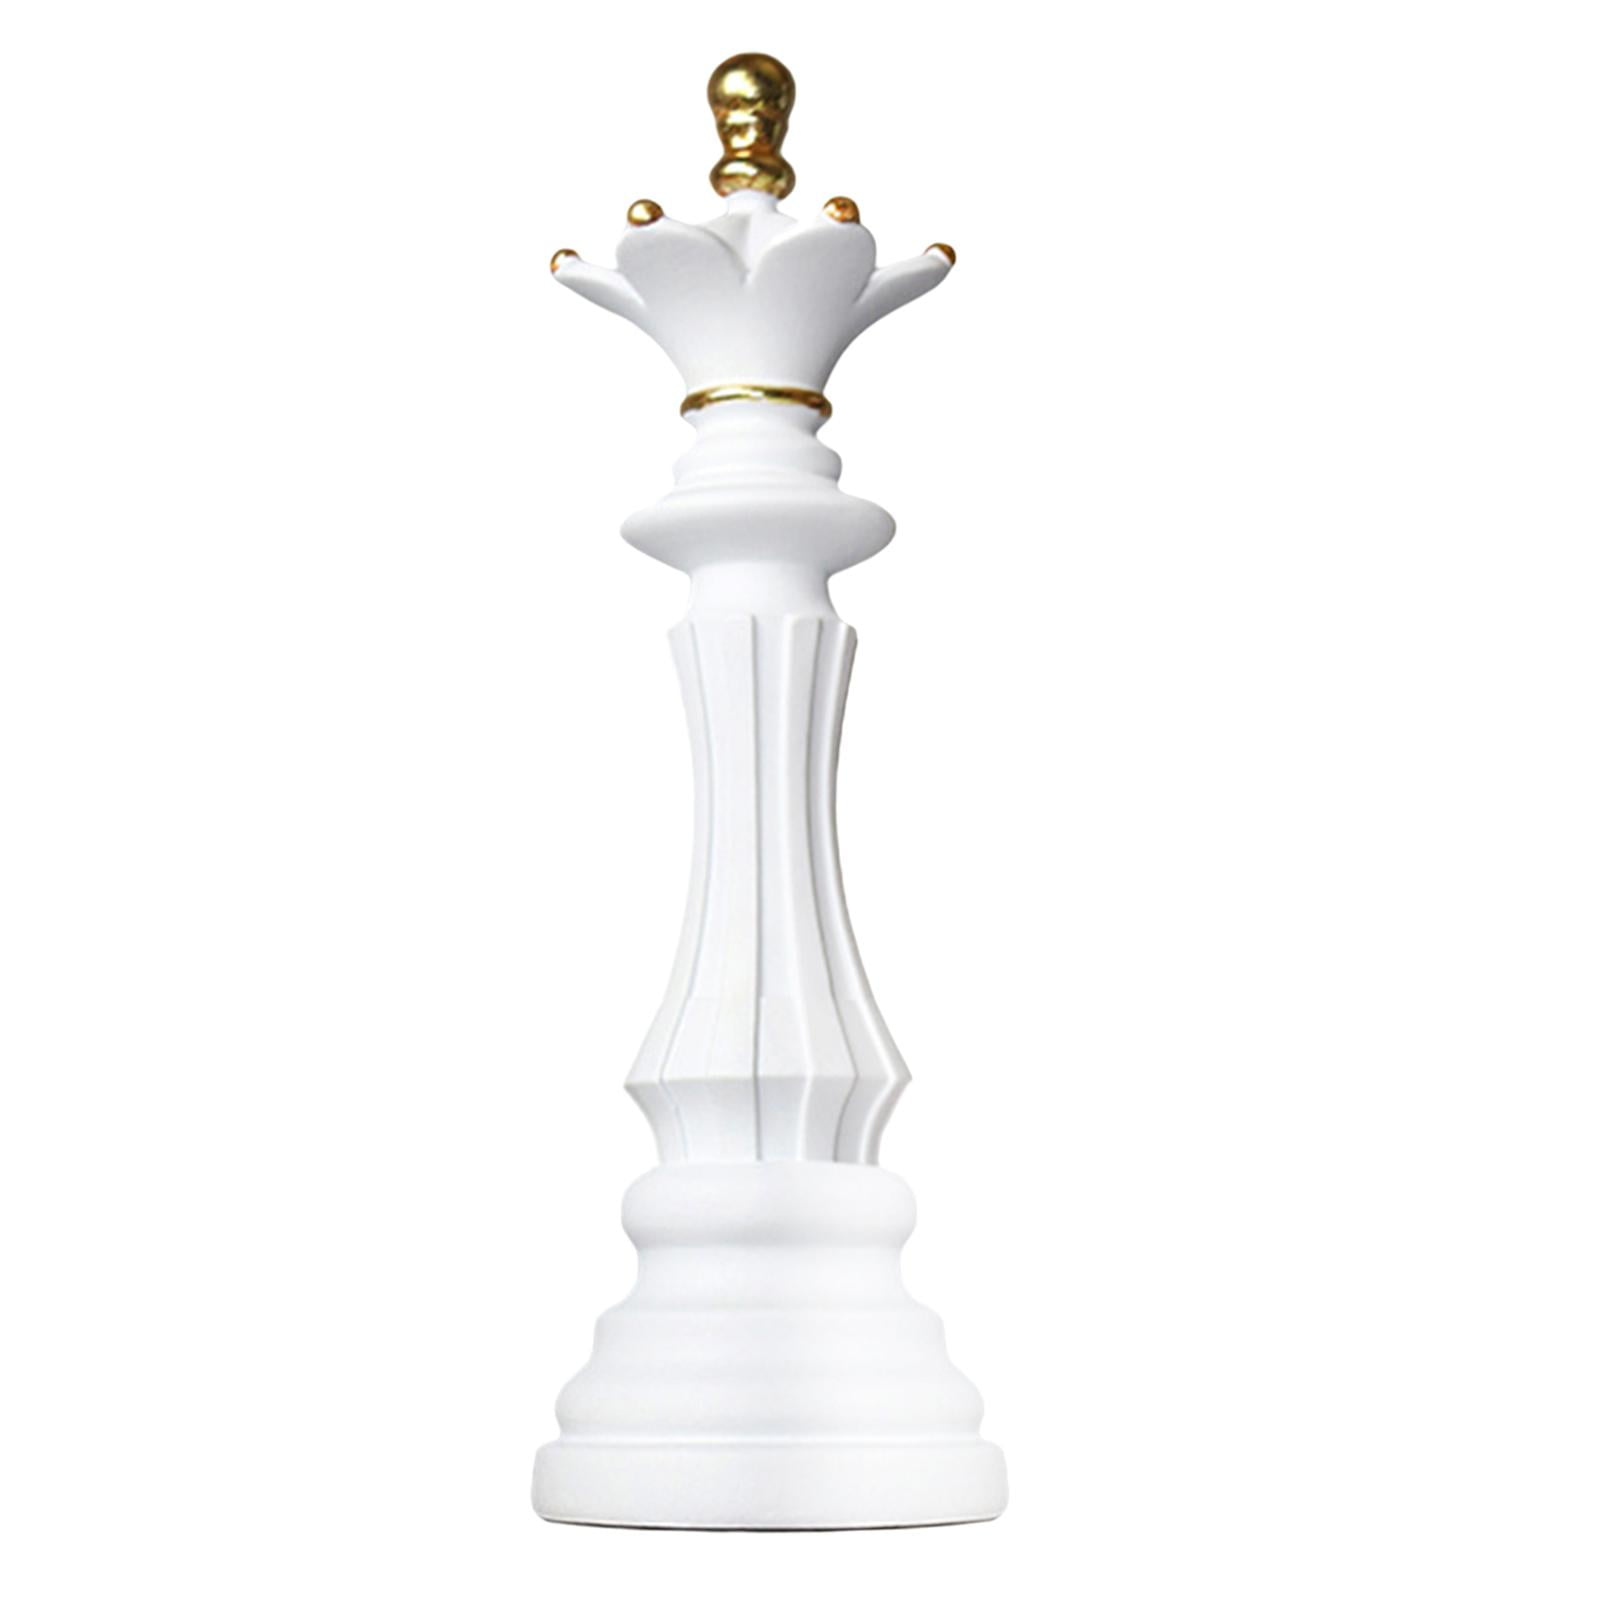 Details about   Resin Chess Pieces King Queen Knight Statues Figures Classic Figurines Decor 